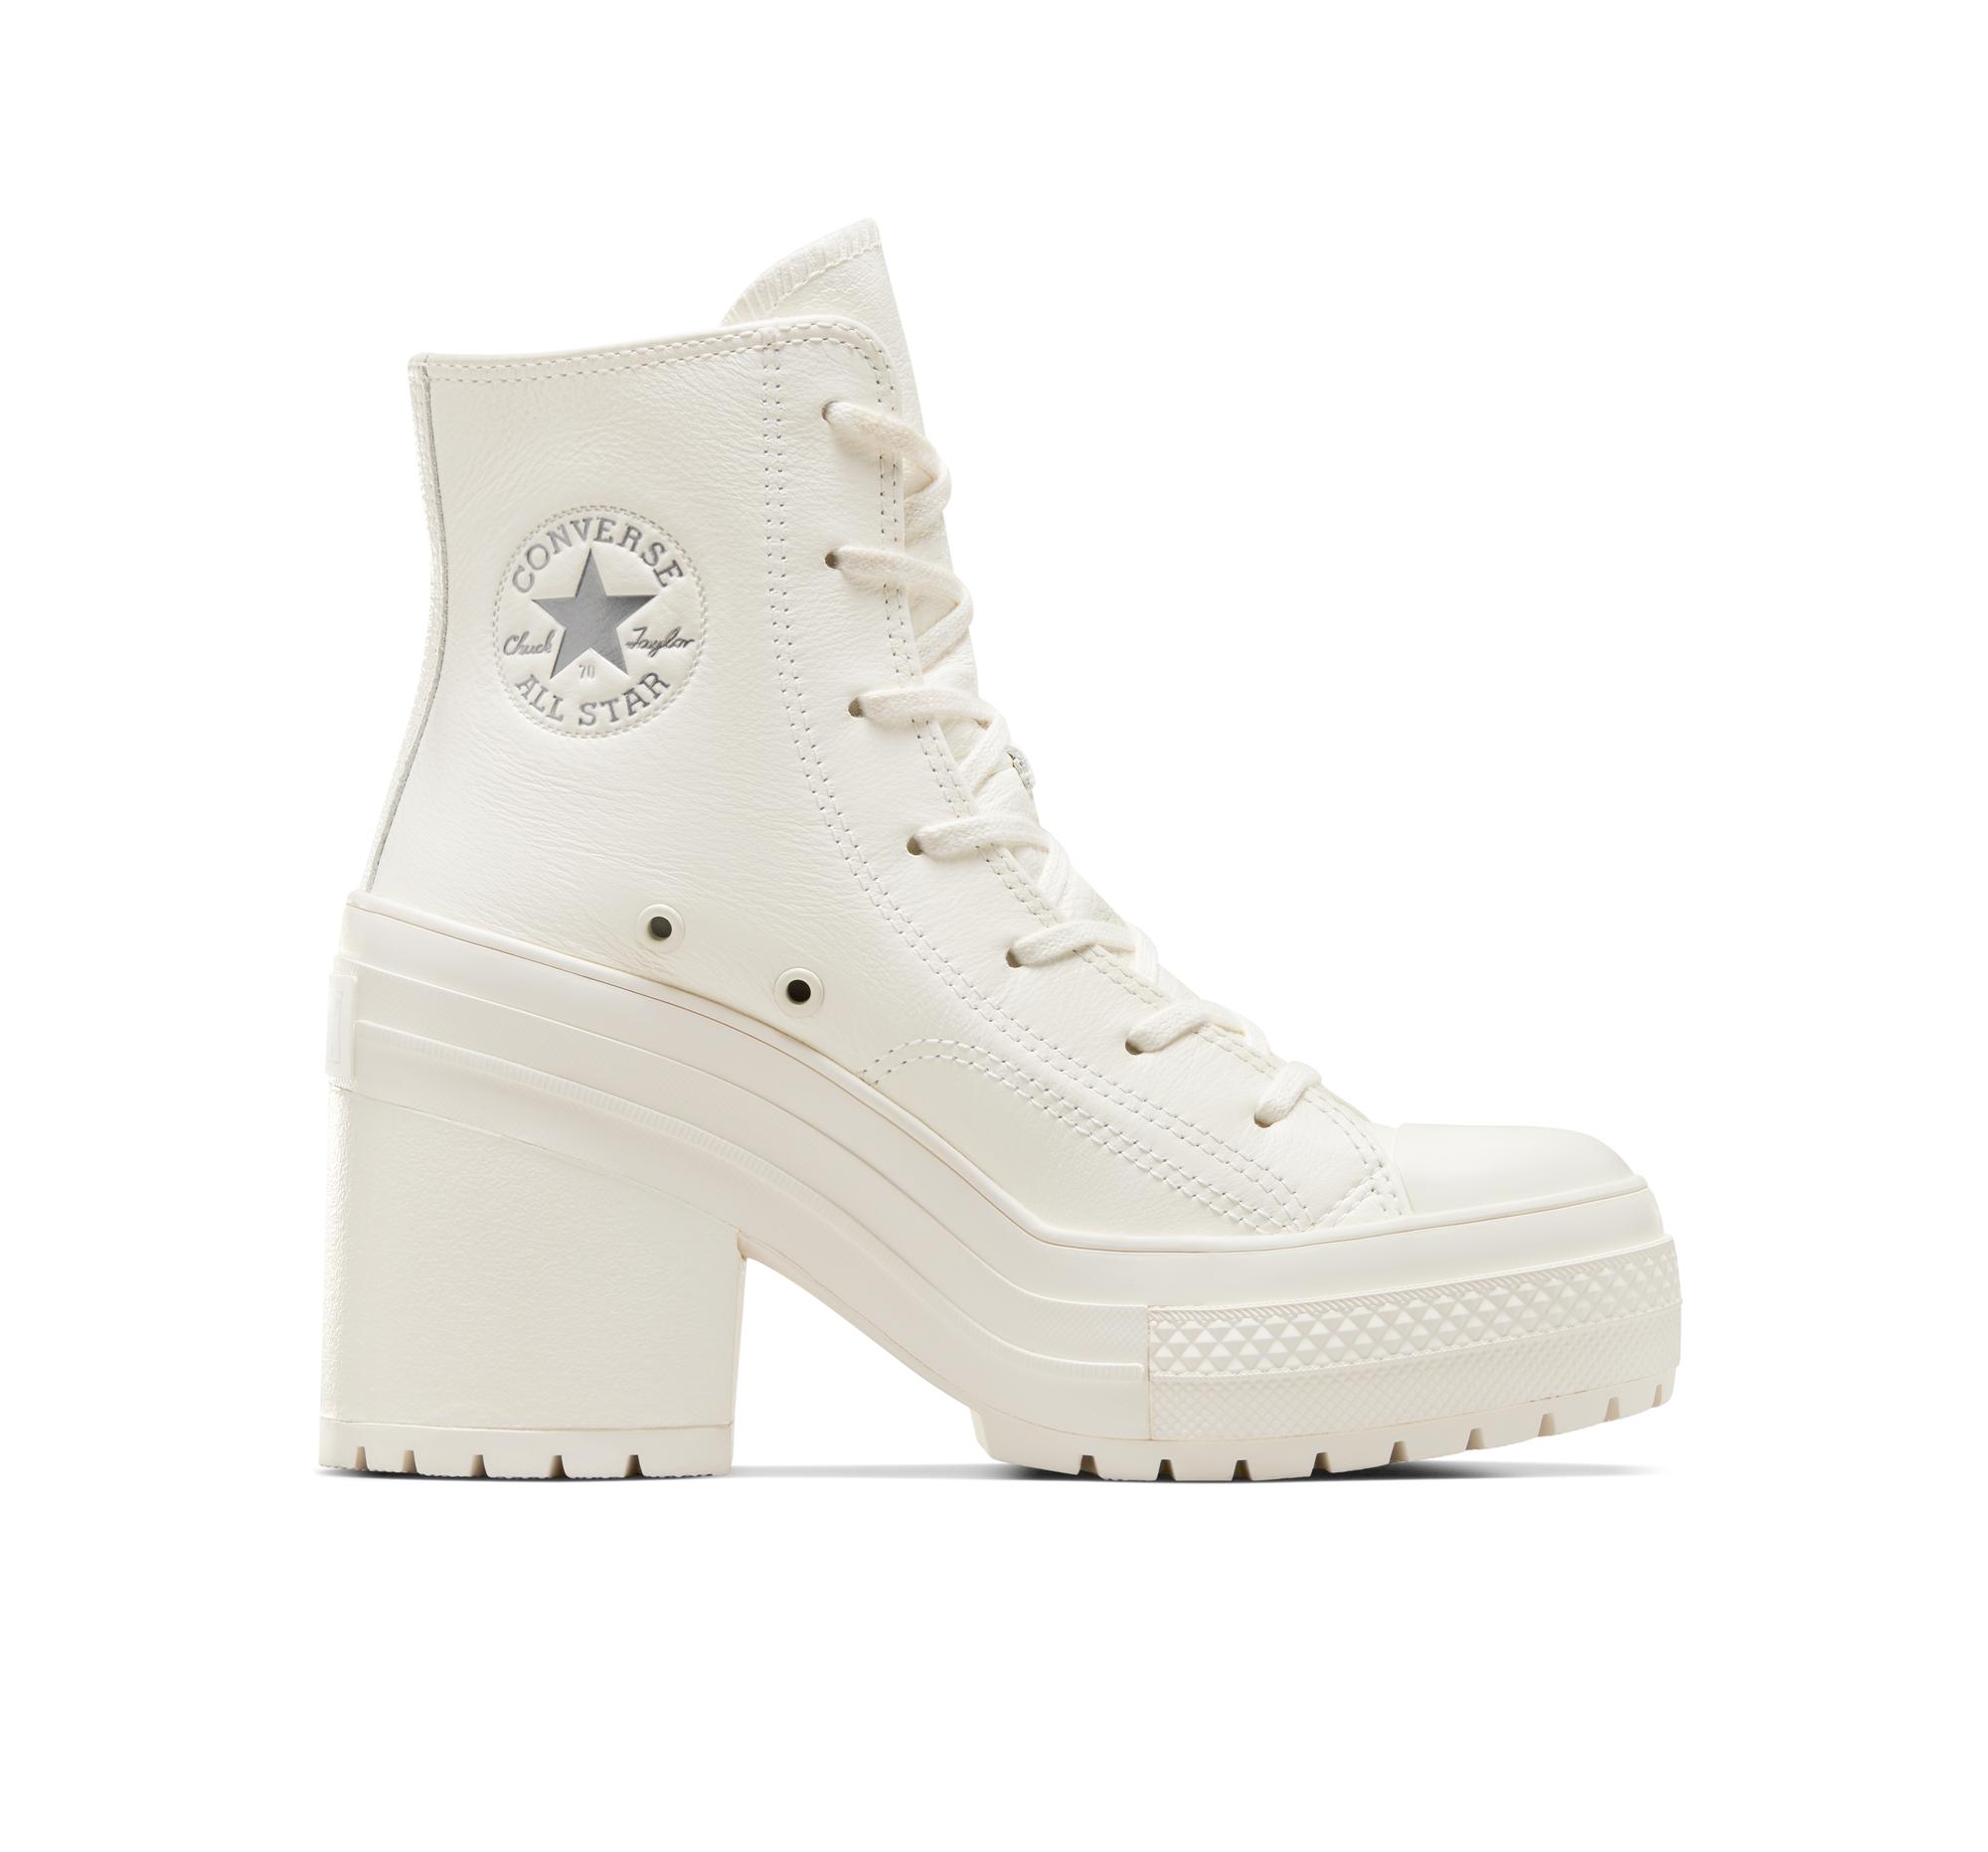 Converse Chuck 70 De Luxe Heel Leather in White | Lyst